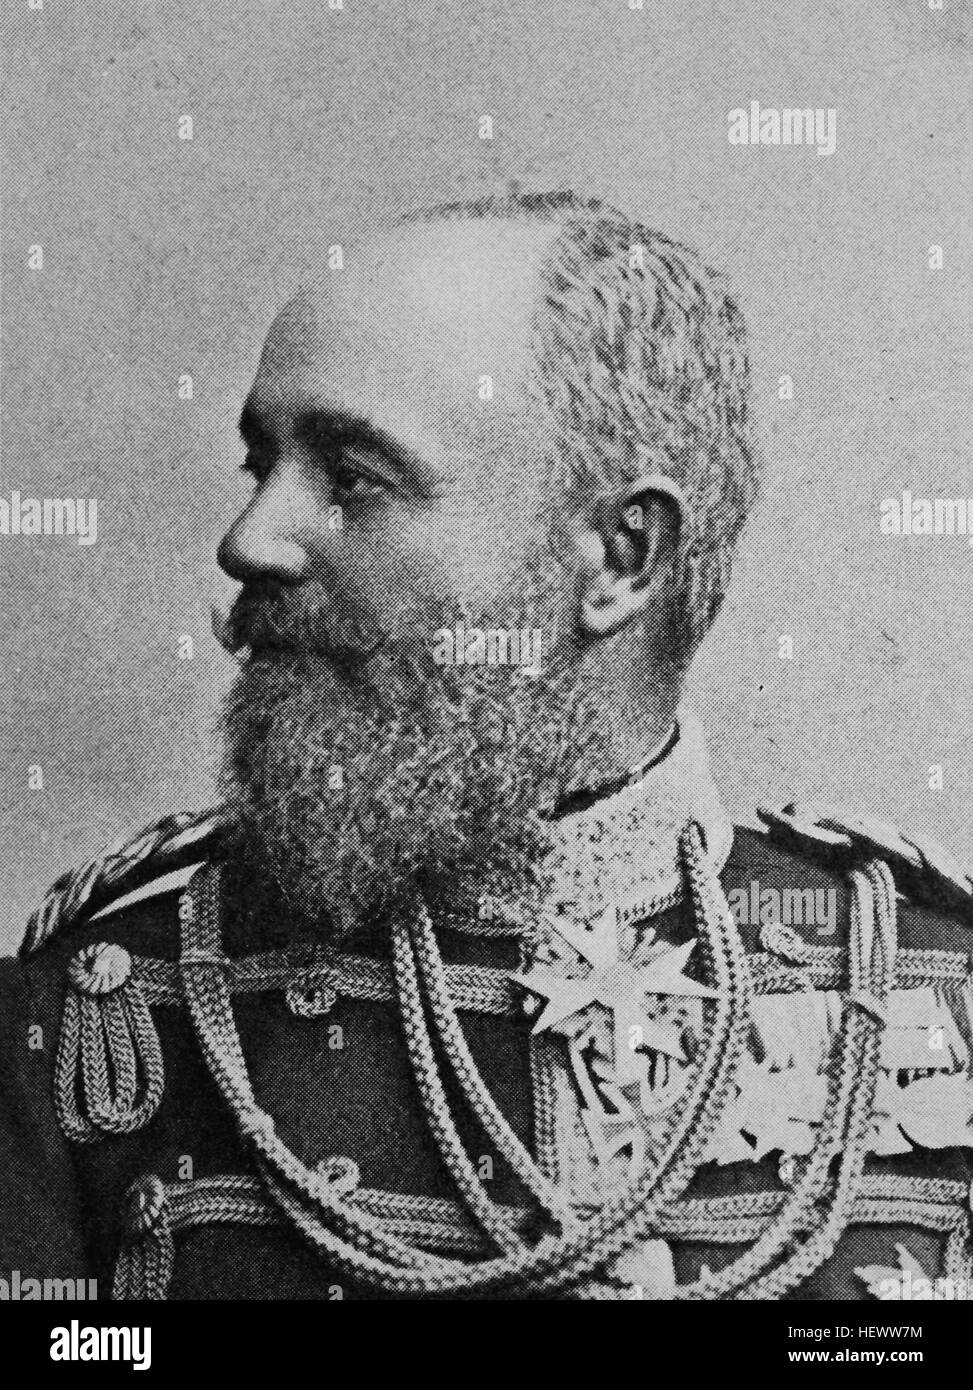 Georg, Prince of Schaumburg-Lippe, 10 October 1846 - 29 April 1911, ruler of the small Principality of Schaumburg-Lippe, picture from 1895, digital improved Stock Photo